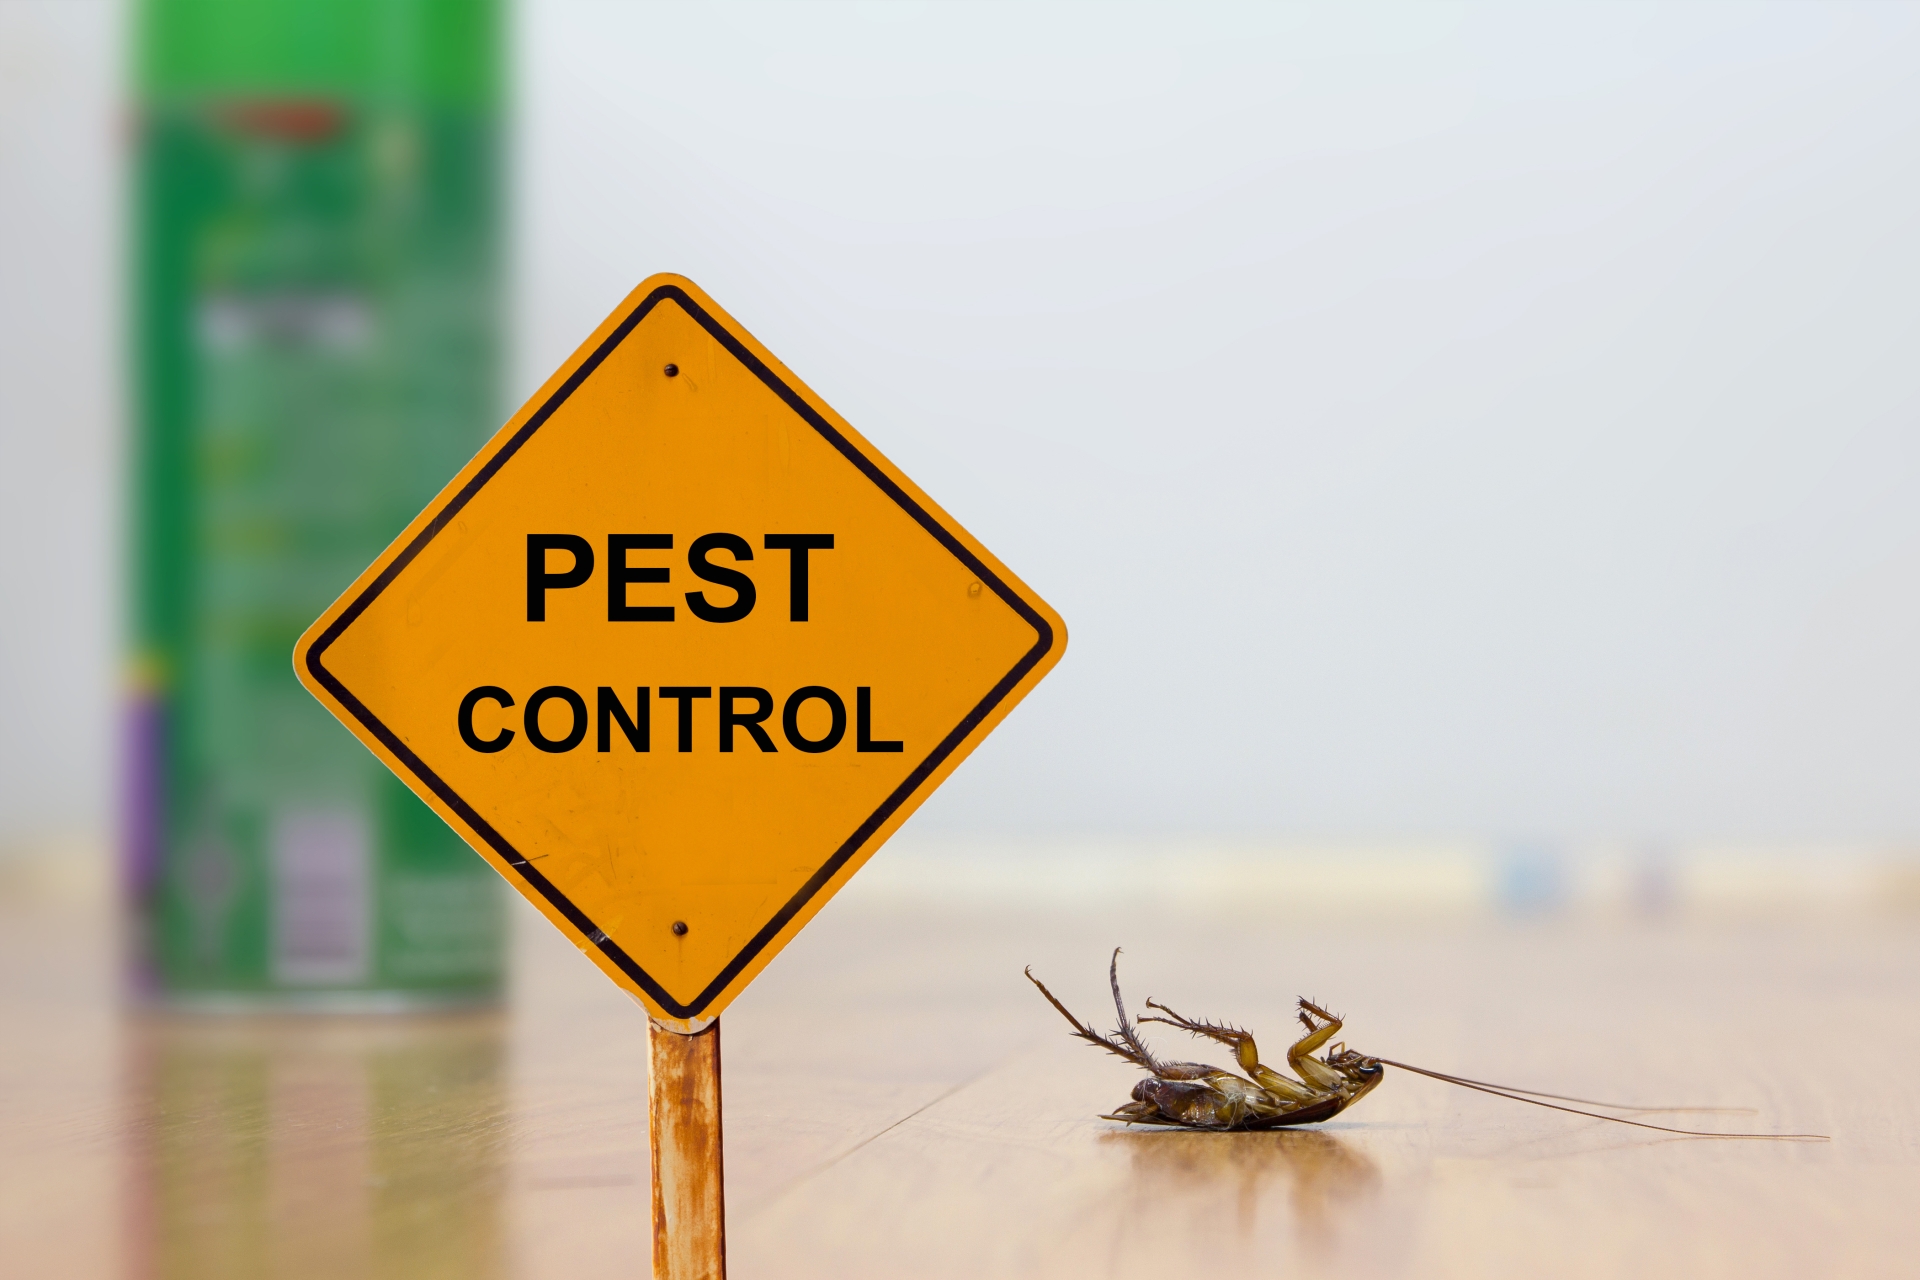 24 Hour Pest Control, Pest Control in Kings Langley, Chipperfield, WD4. Call Now 020 8166 9746